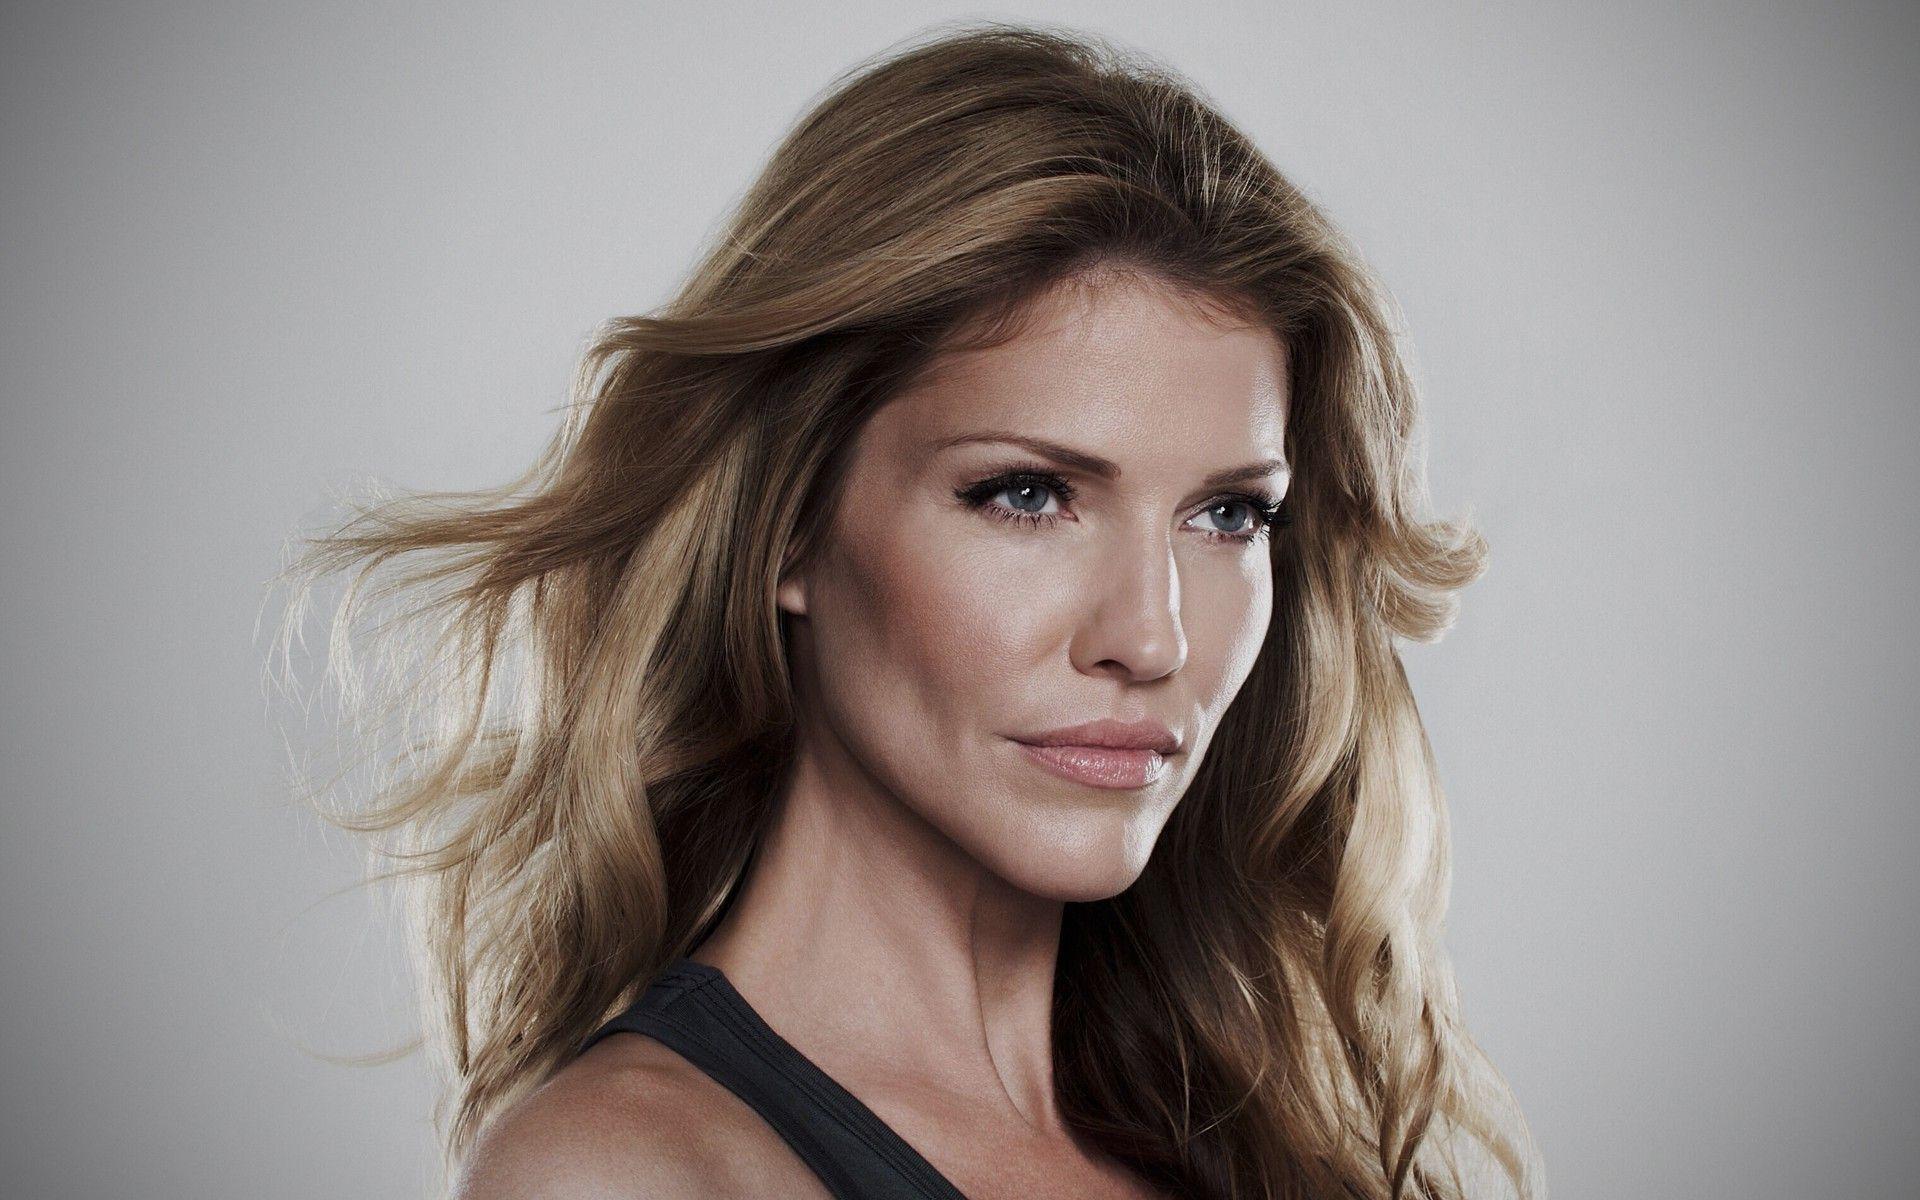 Tricia Helfer Wallpapers